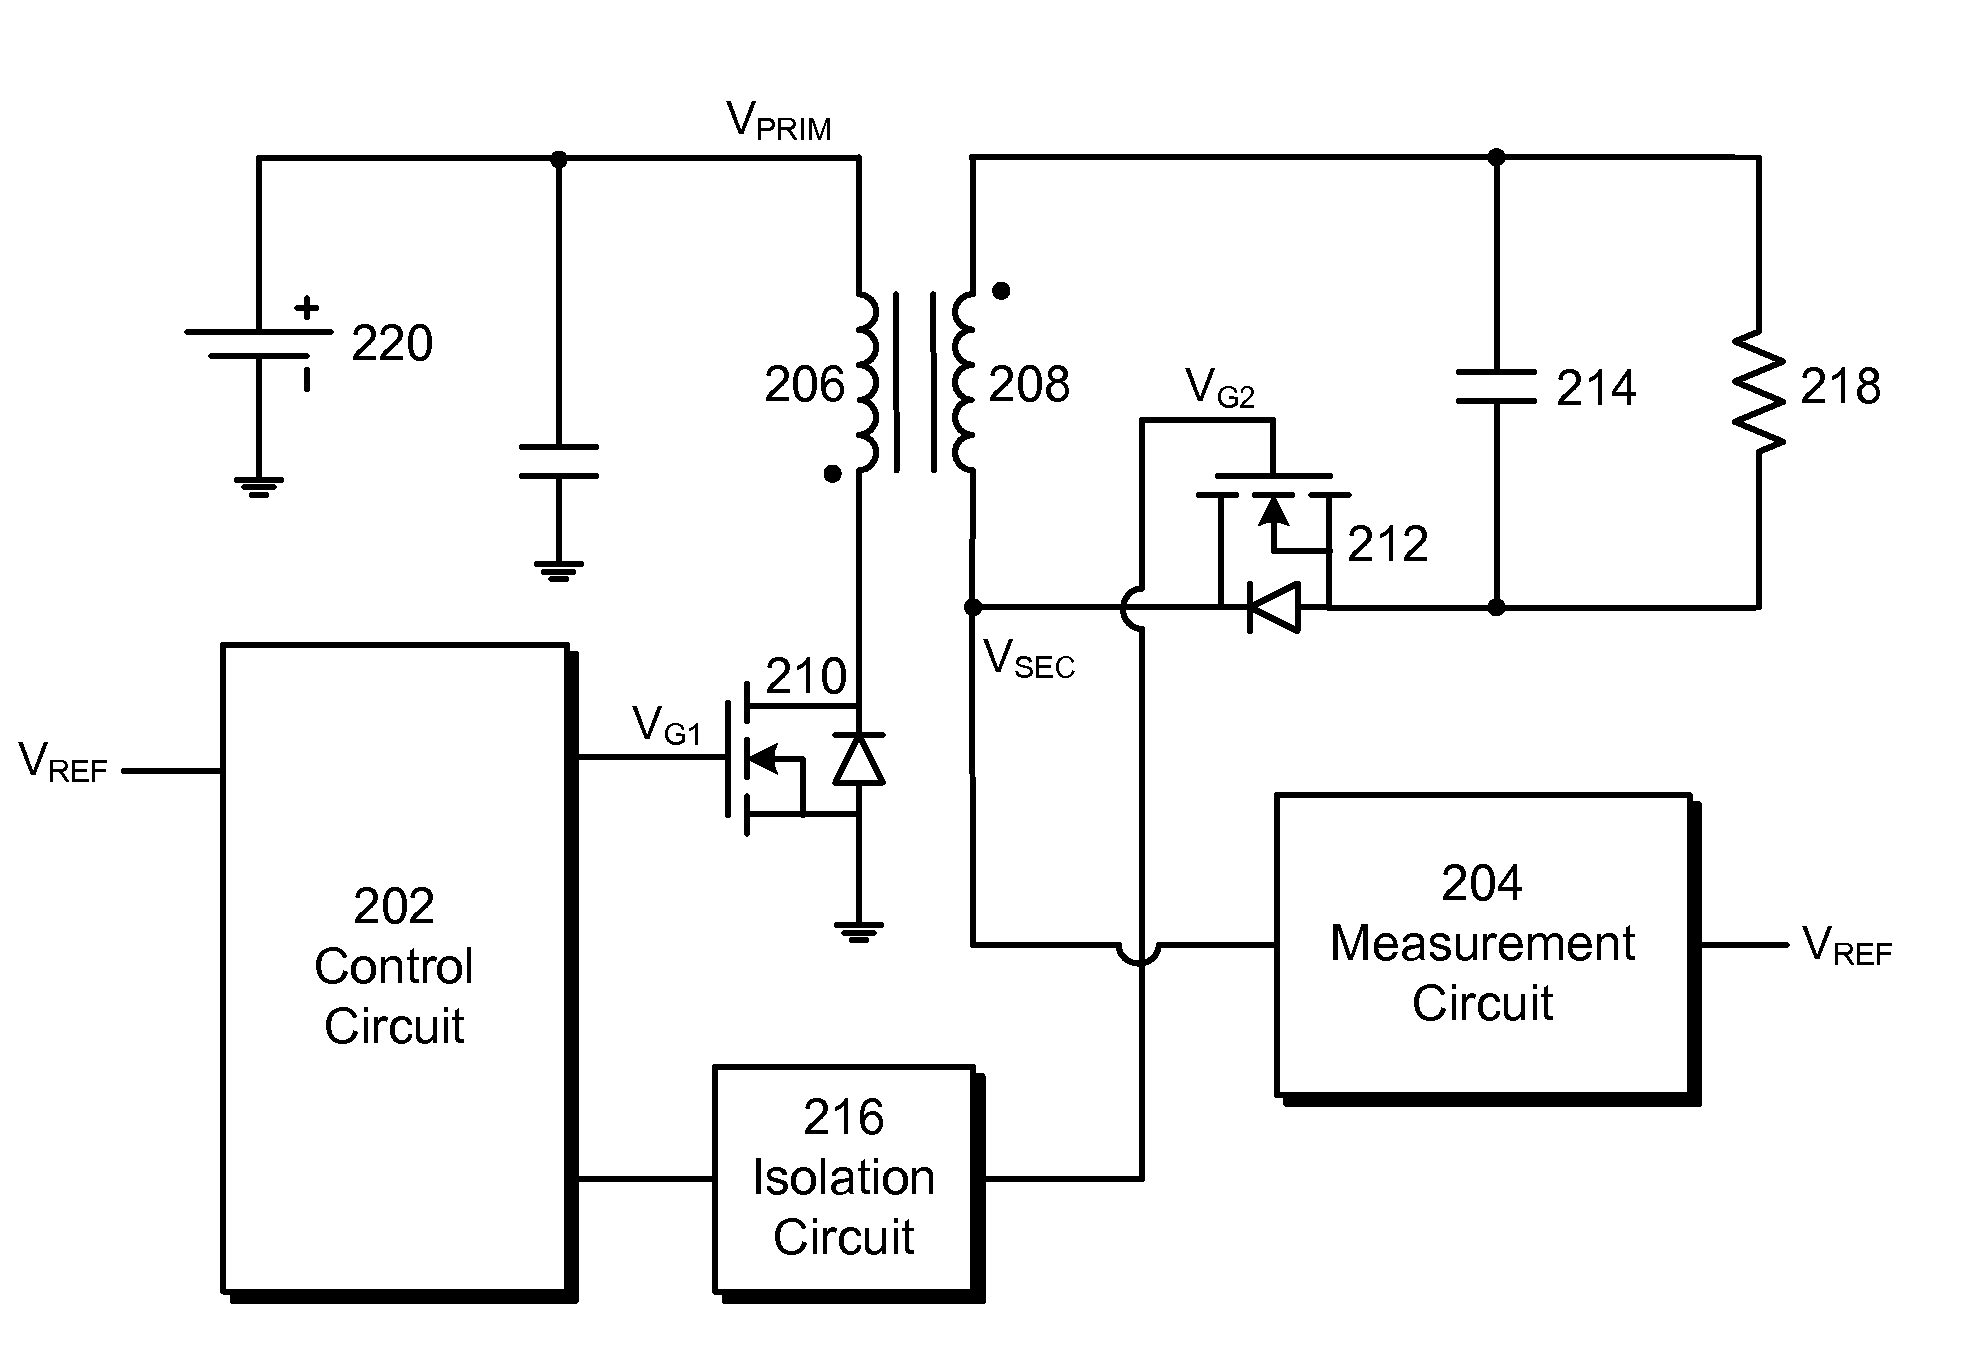 Zero voltage switching in flyback converters with variable input voltages